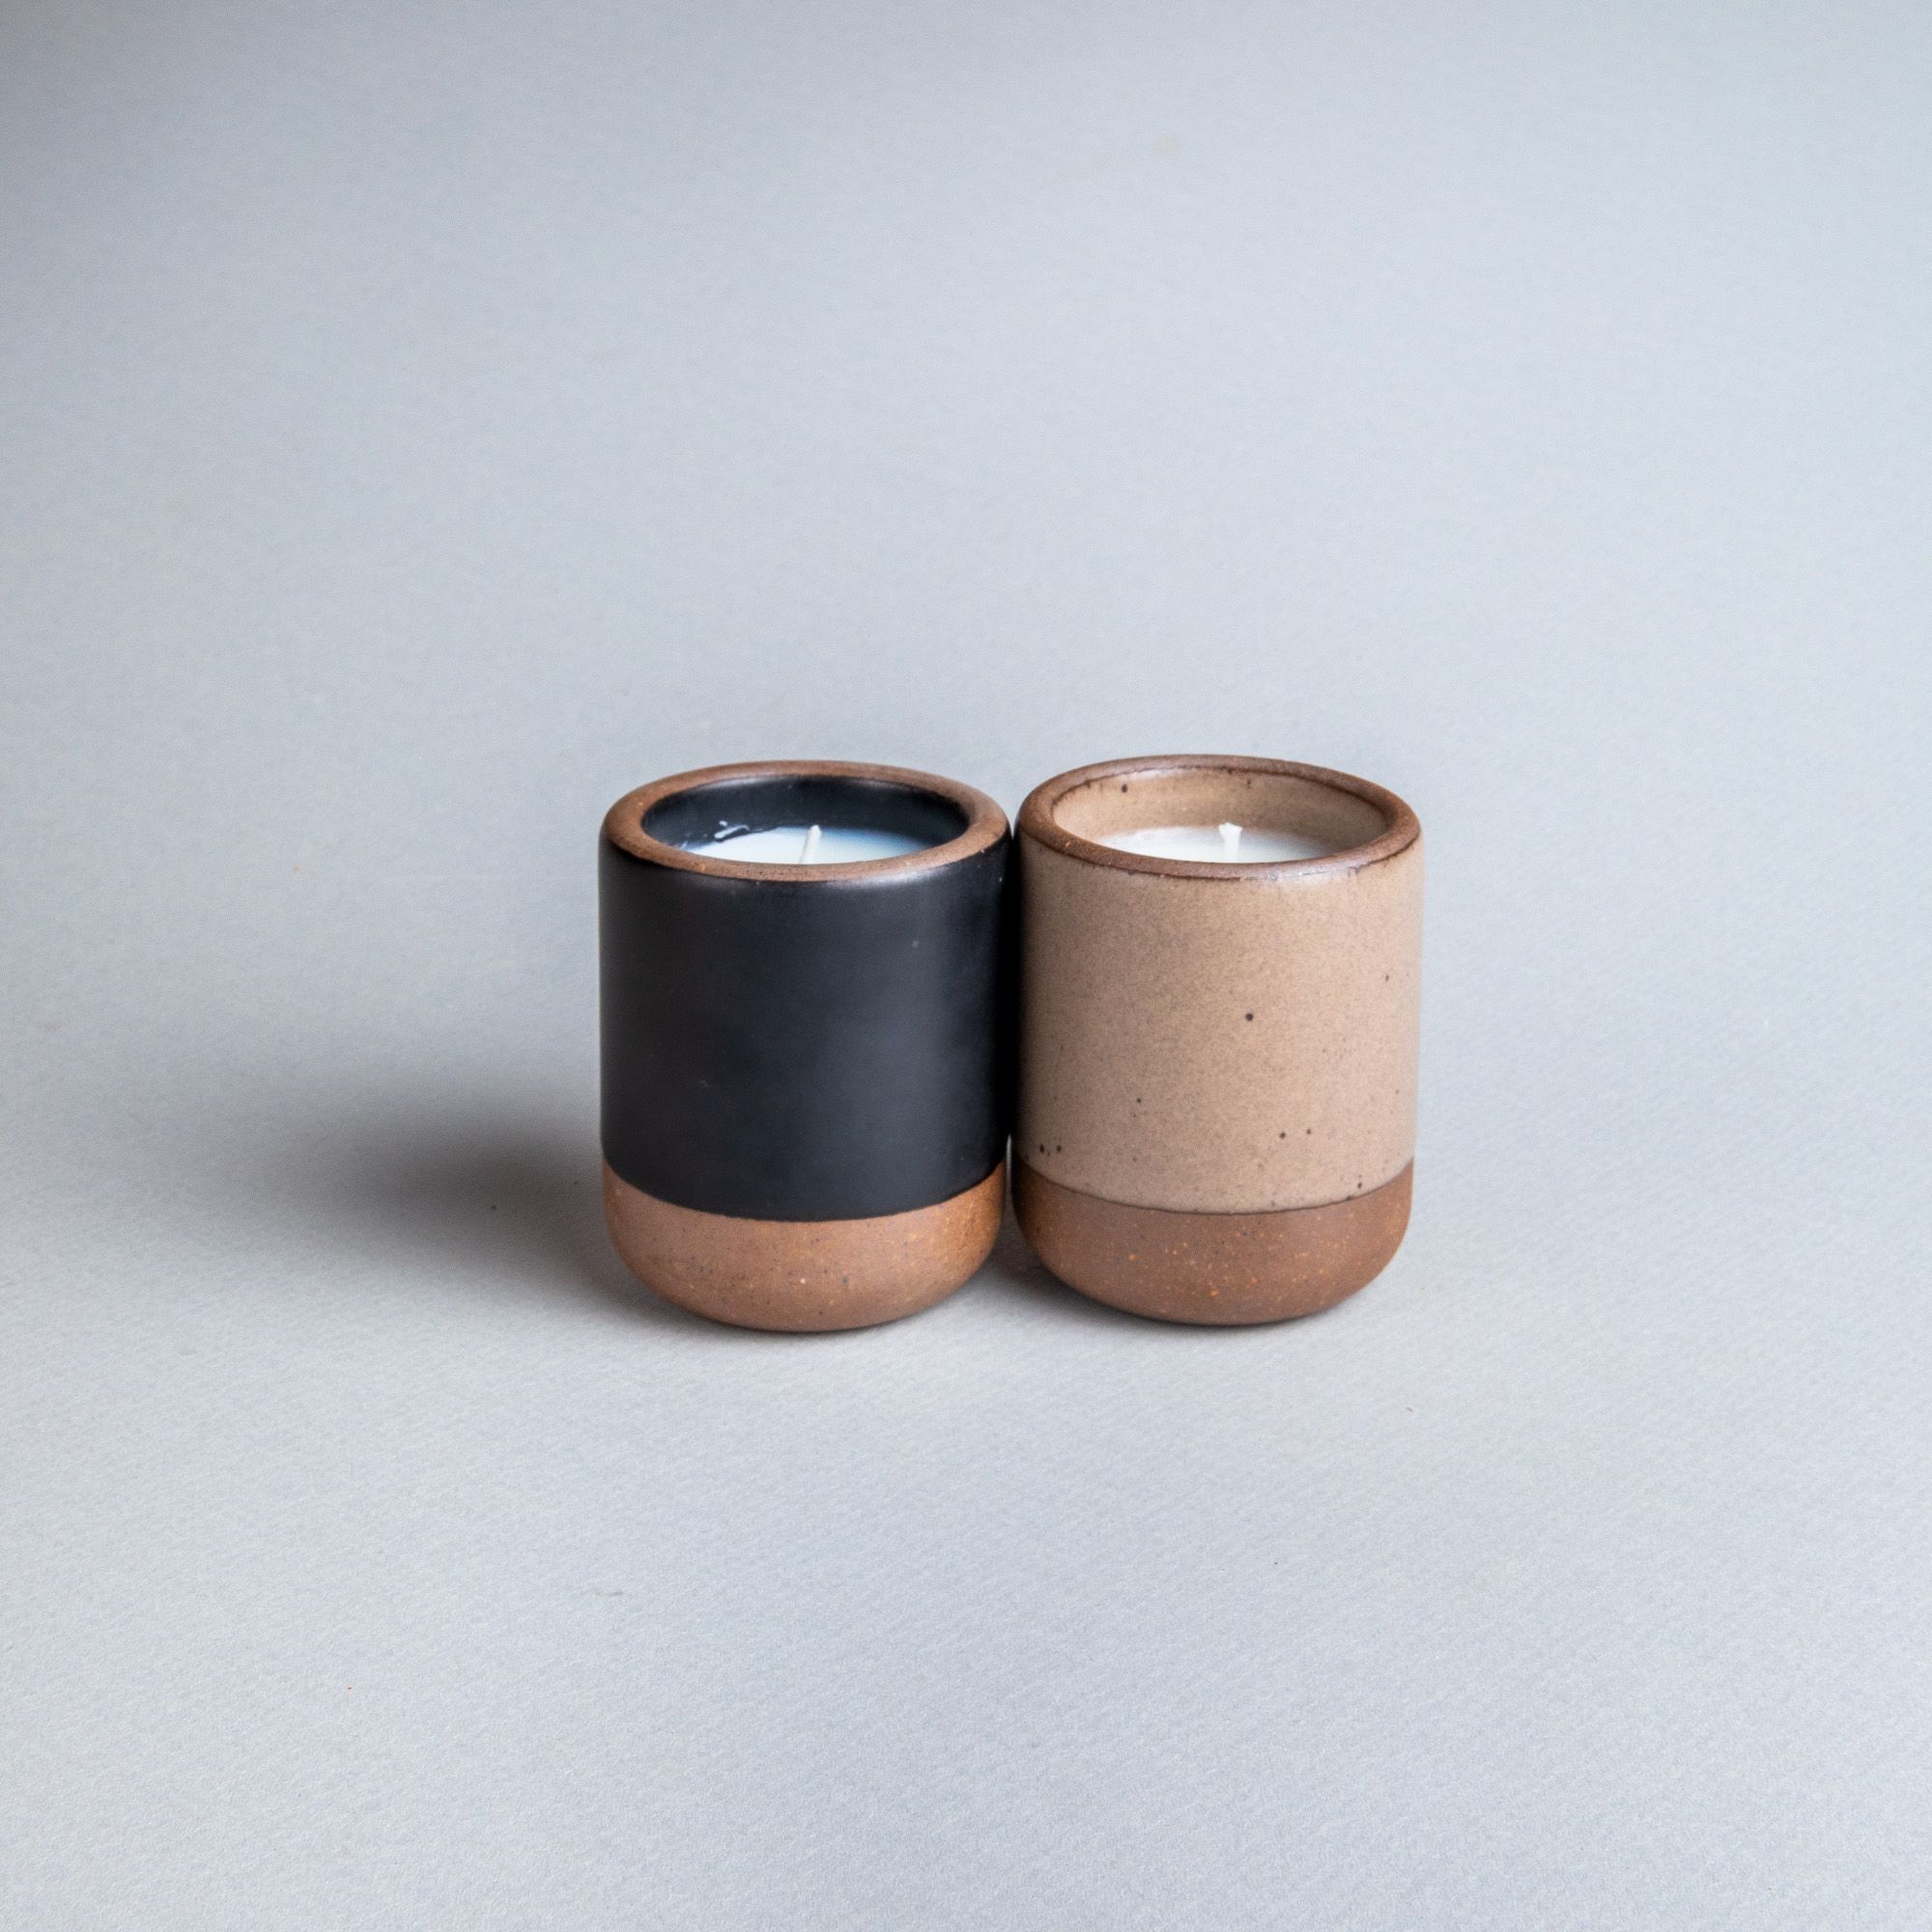 Two small ceramic vessels in dark charcoal and warm pale brown colors with candles inside each.